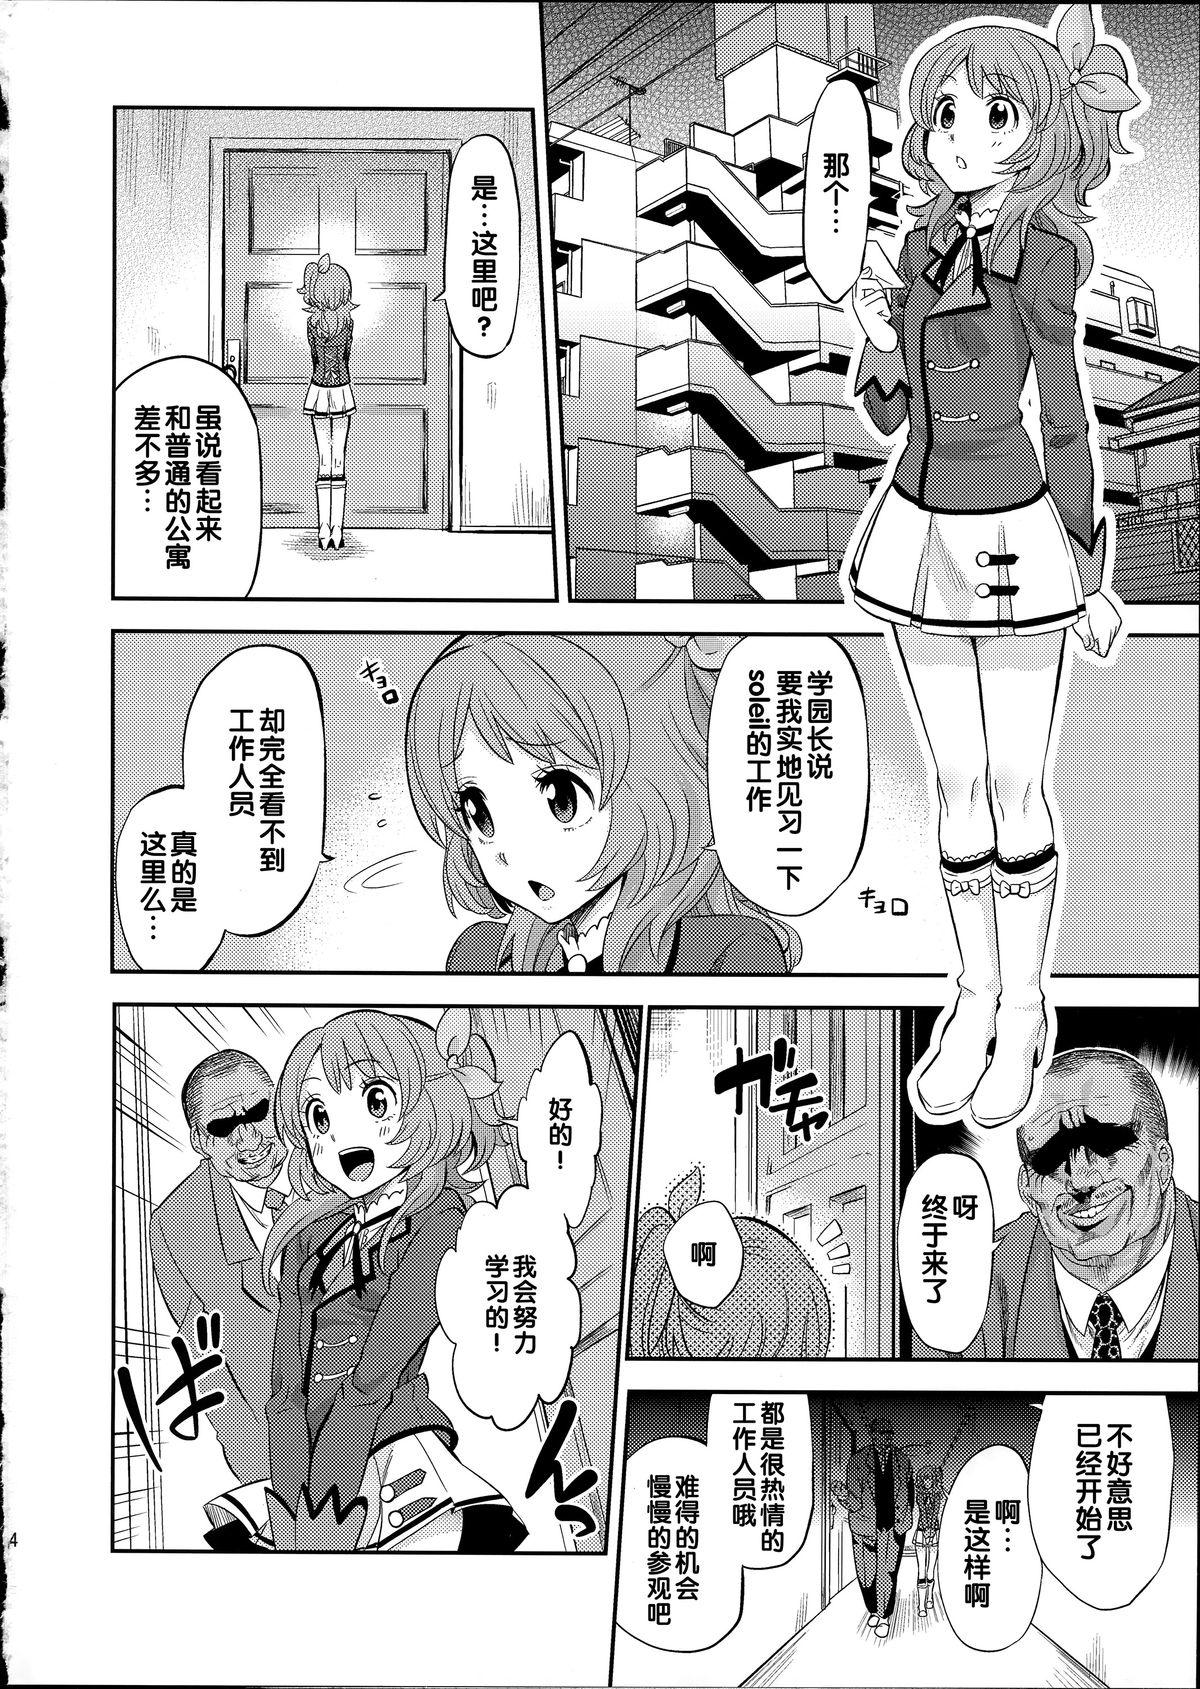 Classic IT WAS A good EXPERiENCE - Aikatsu Sexy Girl - Page 4